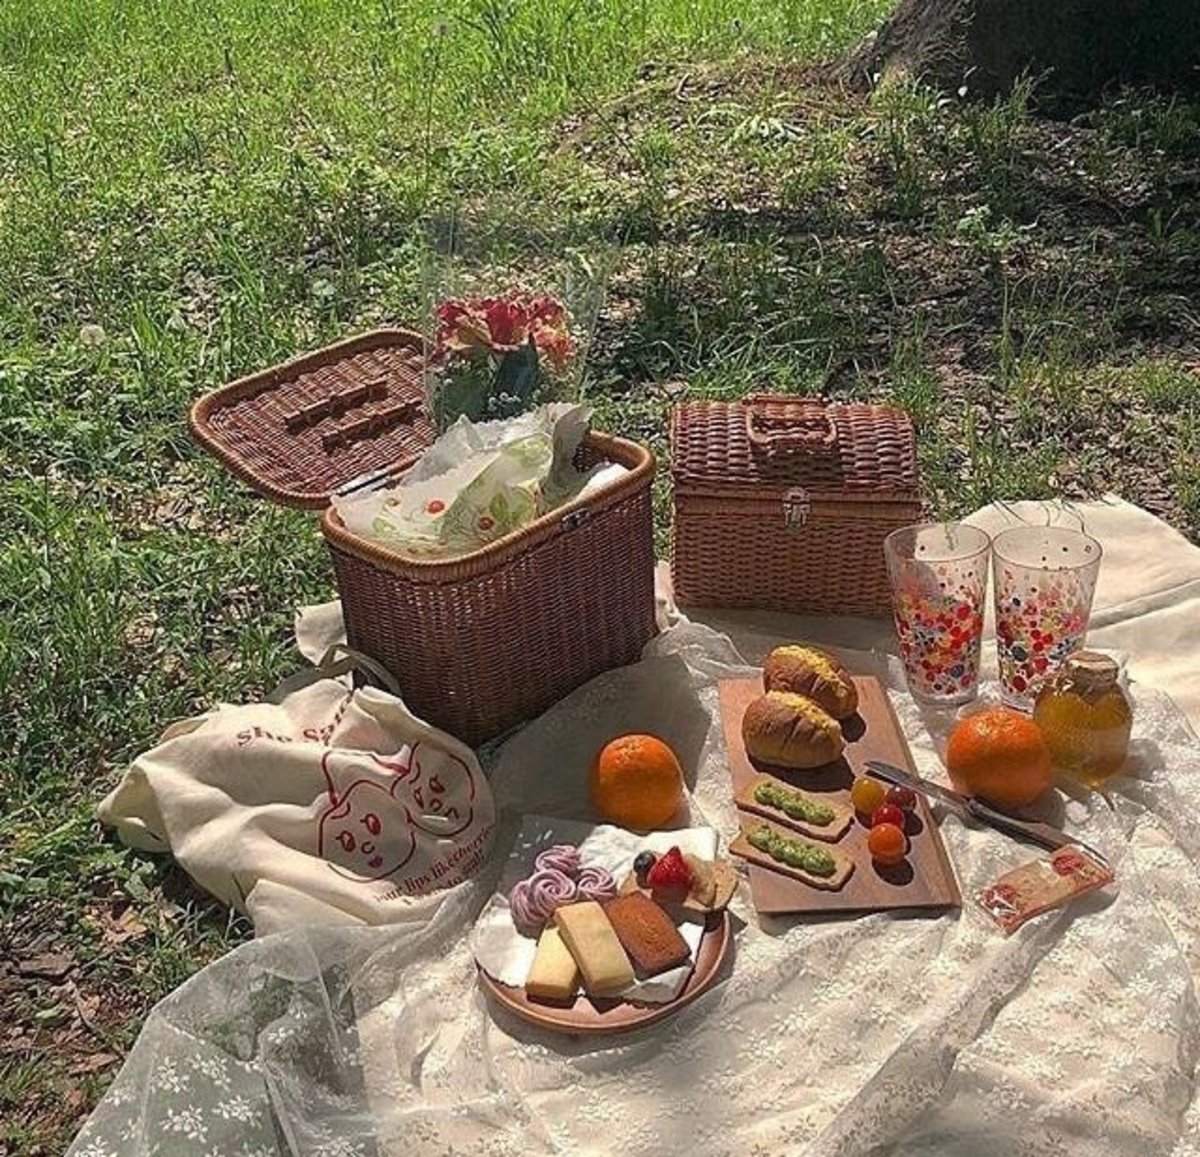 A Picnic with Friends: A Short Story/Tale